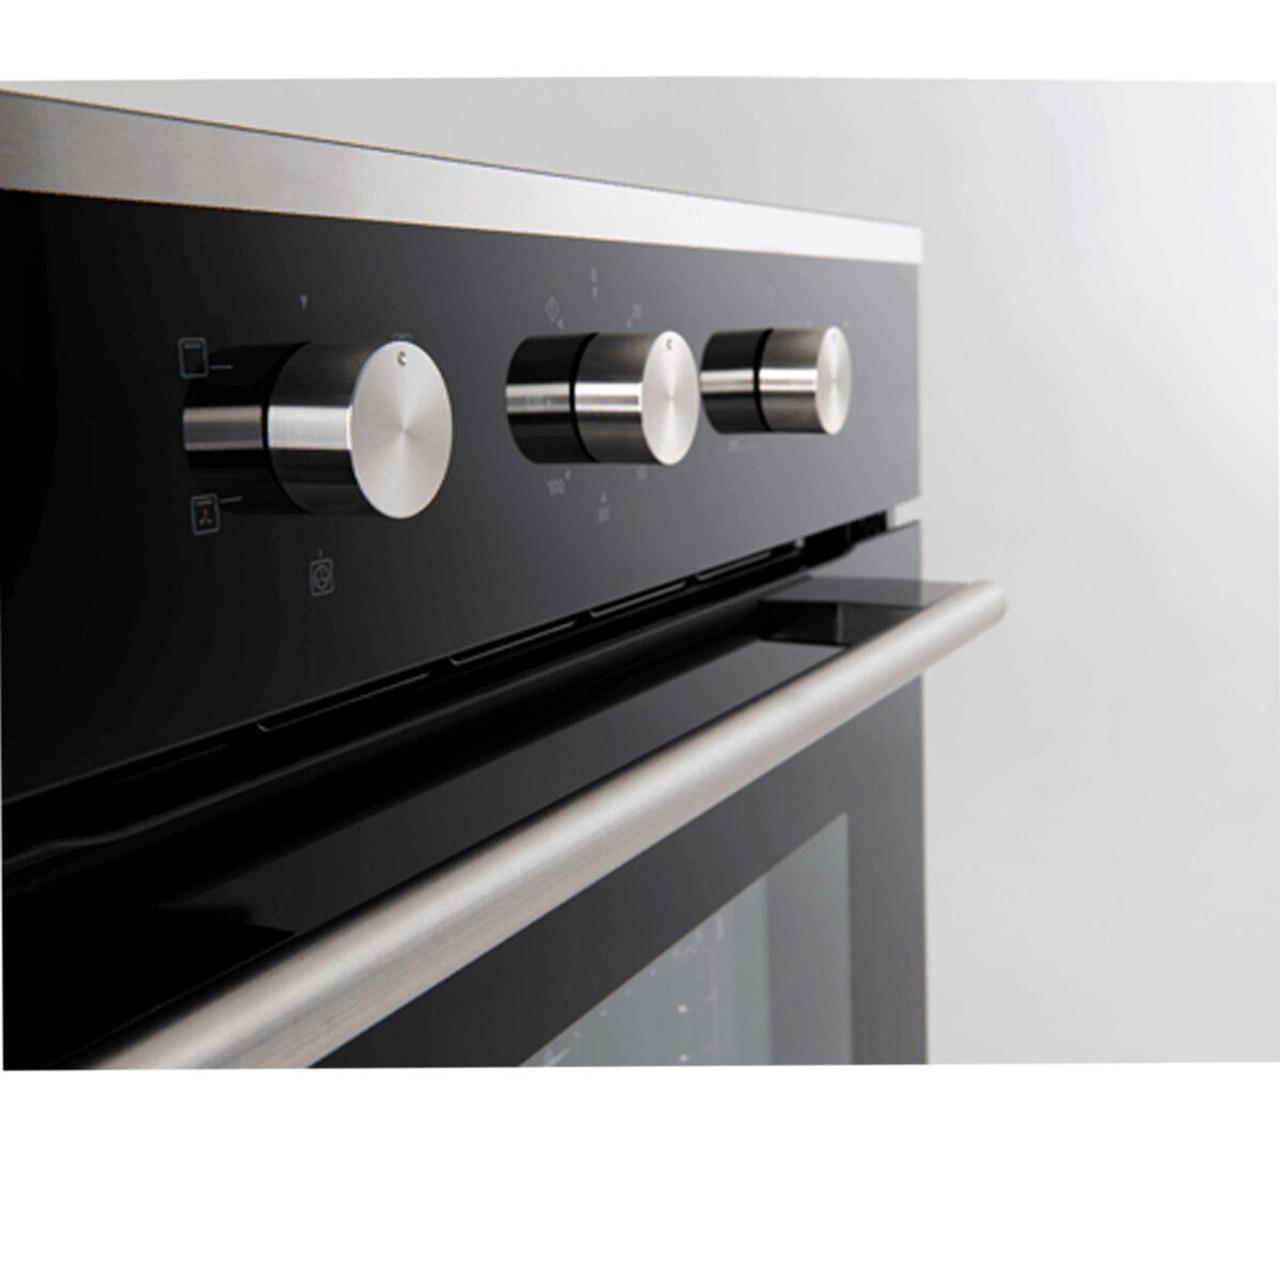 EO604SX - 60cm Built-in Oven - Stainless Steel with Black Glass